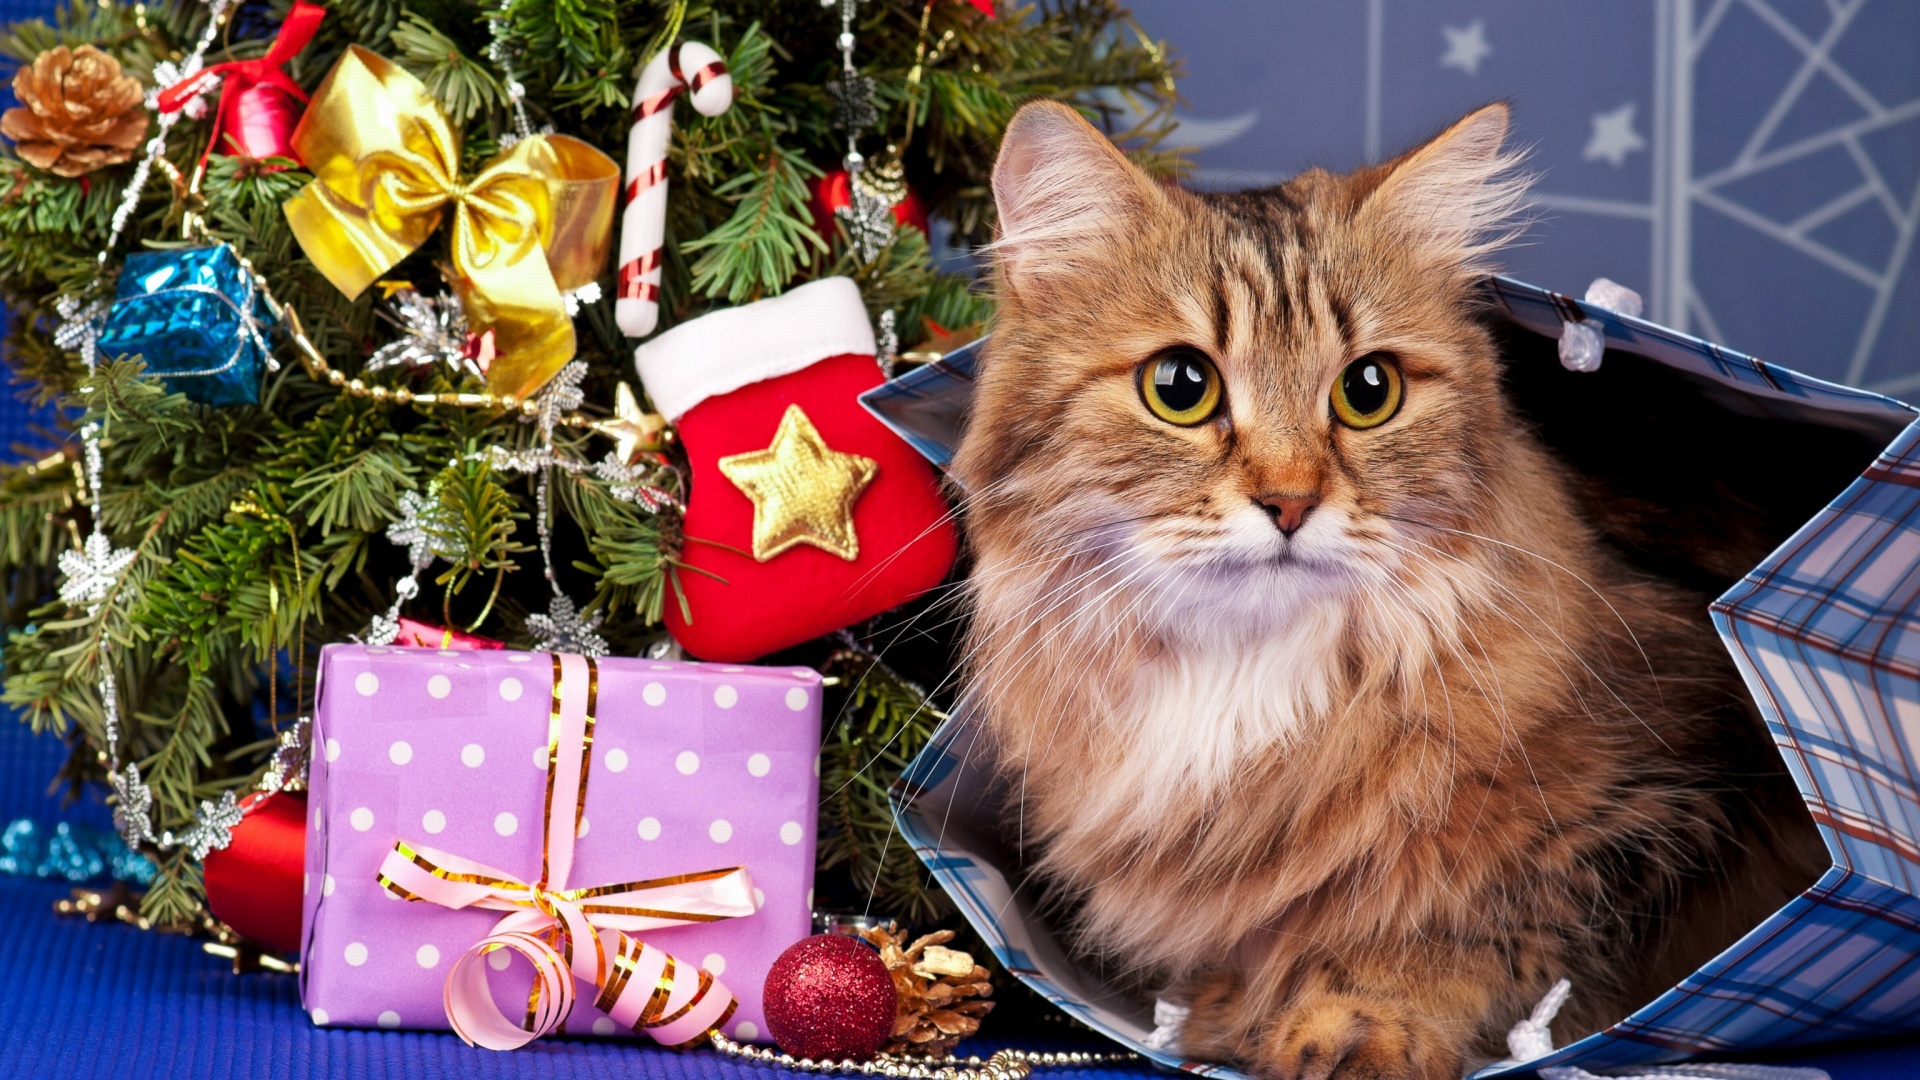 Merry Christmas Cards Wishes with Cat wallpaper 1920x1080